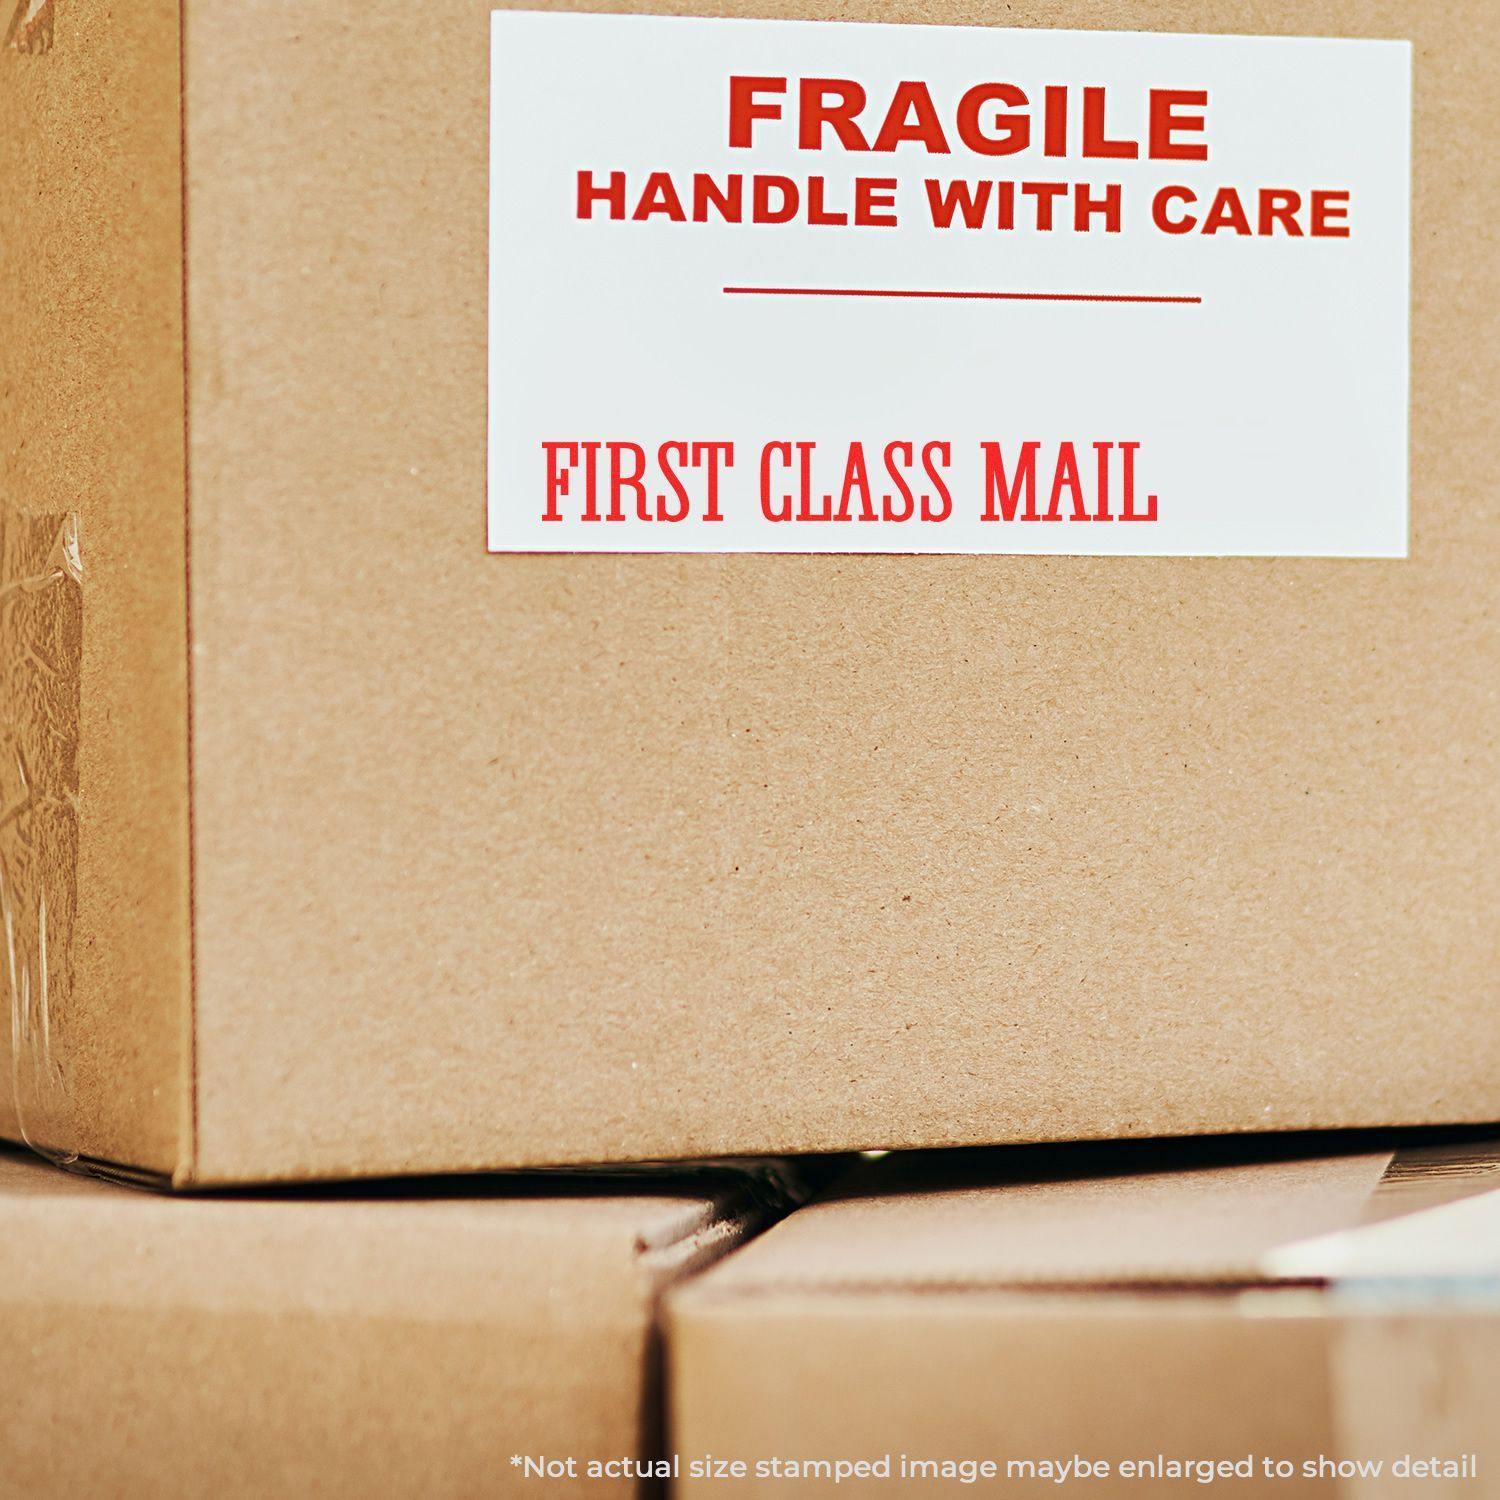 A self-inking stamp with a stamped image showing how the text "FIRST CLASS MAIL" in a times font is displayed after stamping.